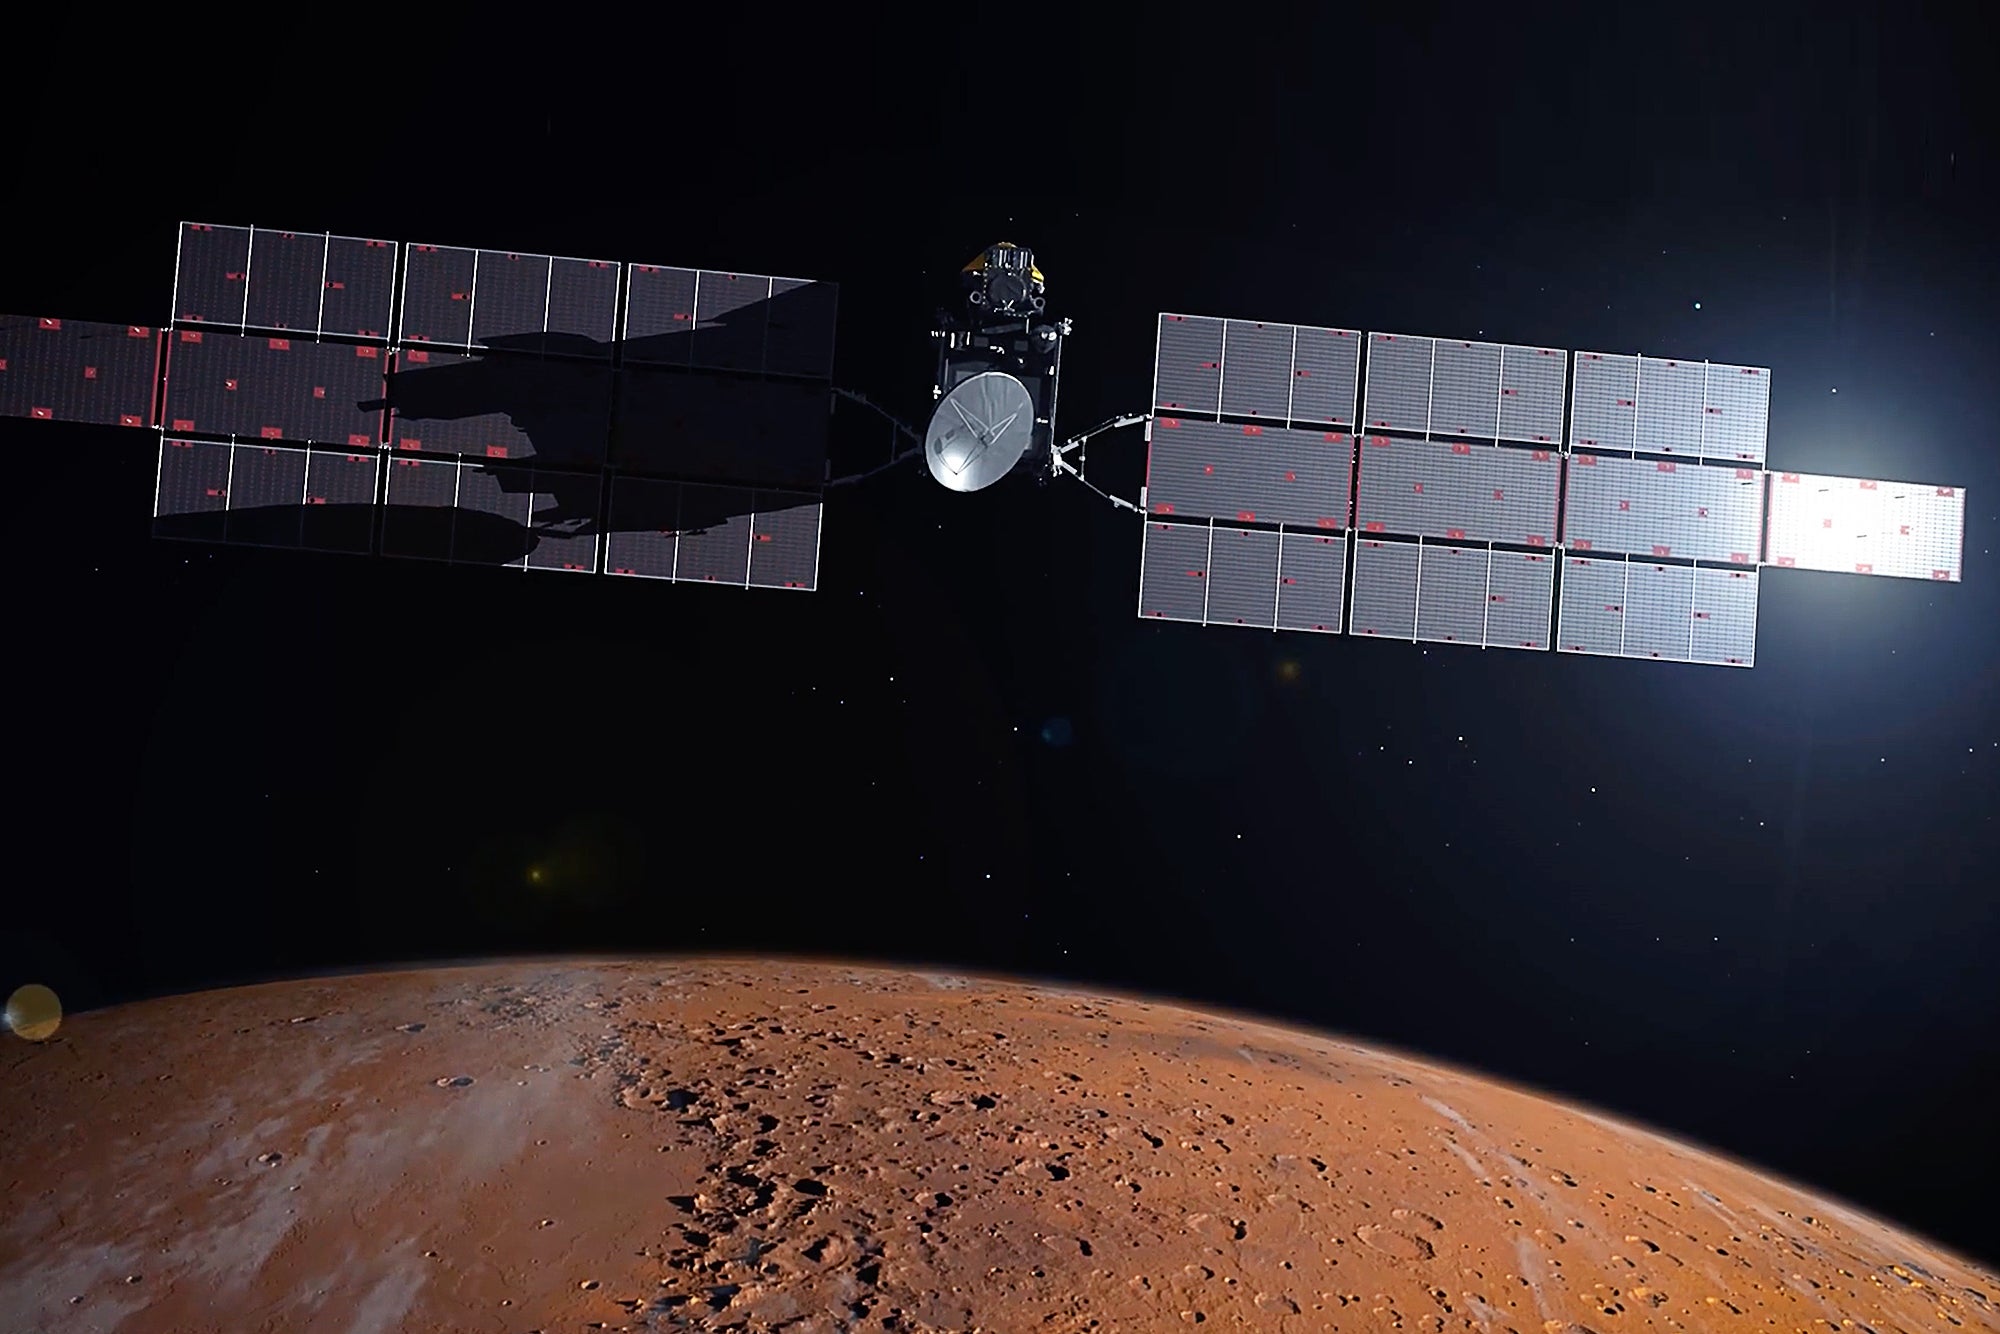 Here's How to Bring Mars Down to Earth: Let NASA Do What NASA Does Best